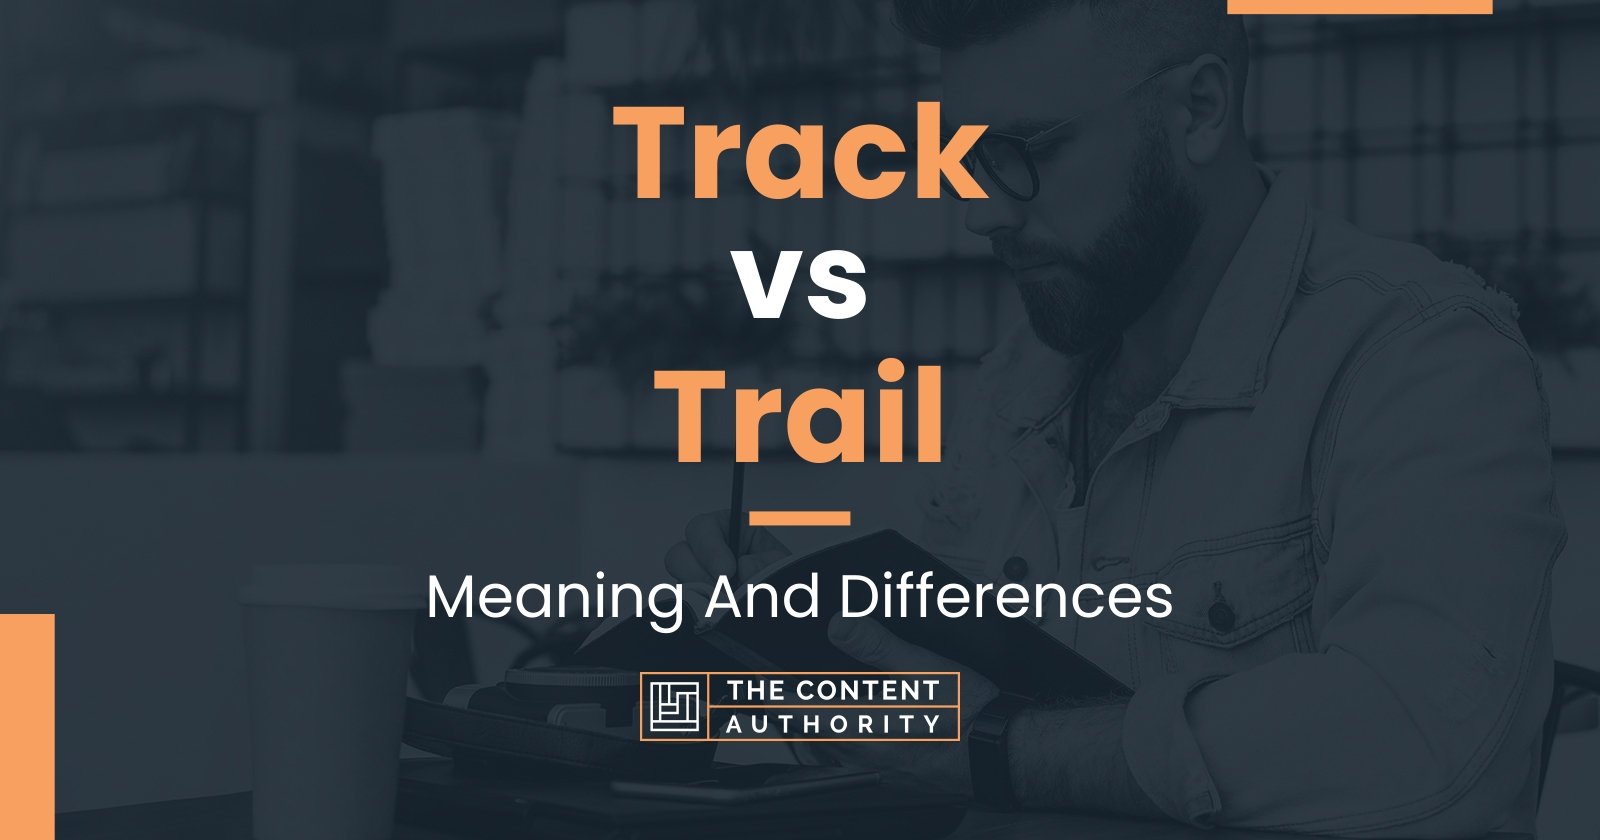 Track vs Trail: Meaning And Differences